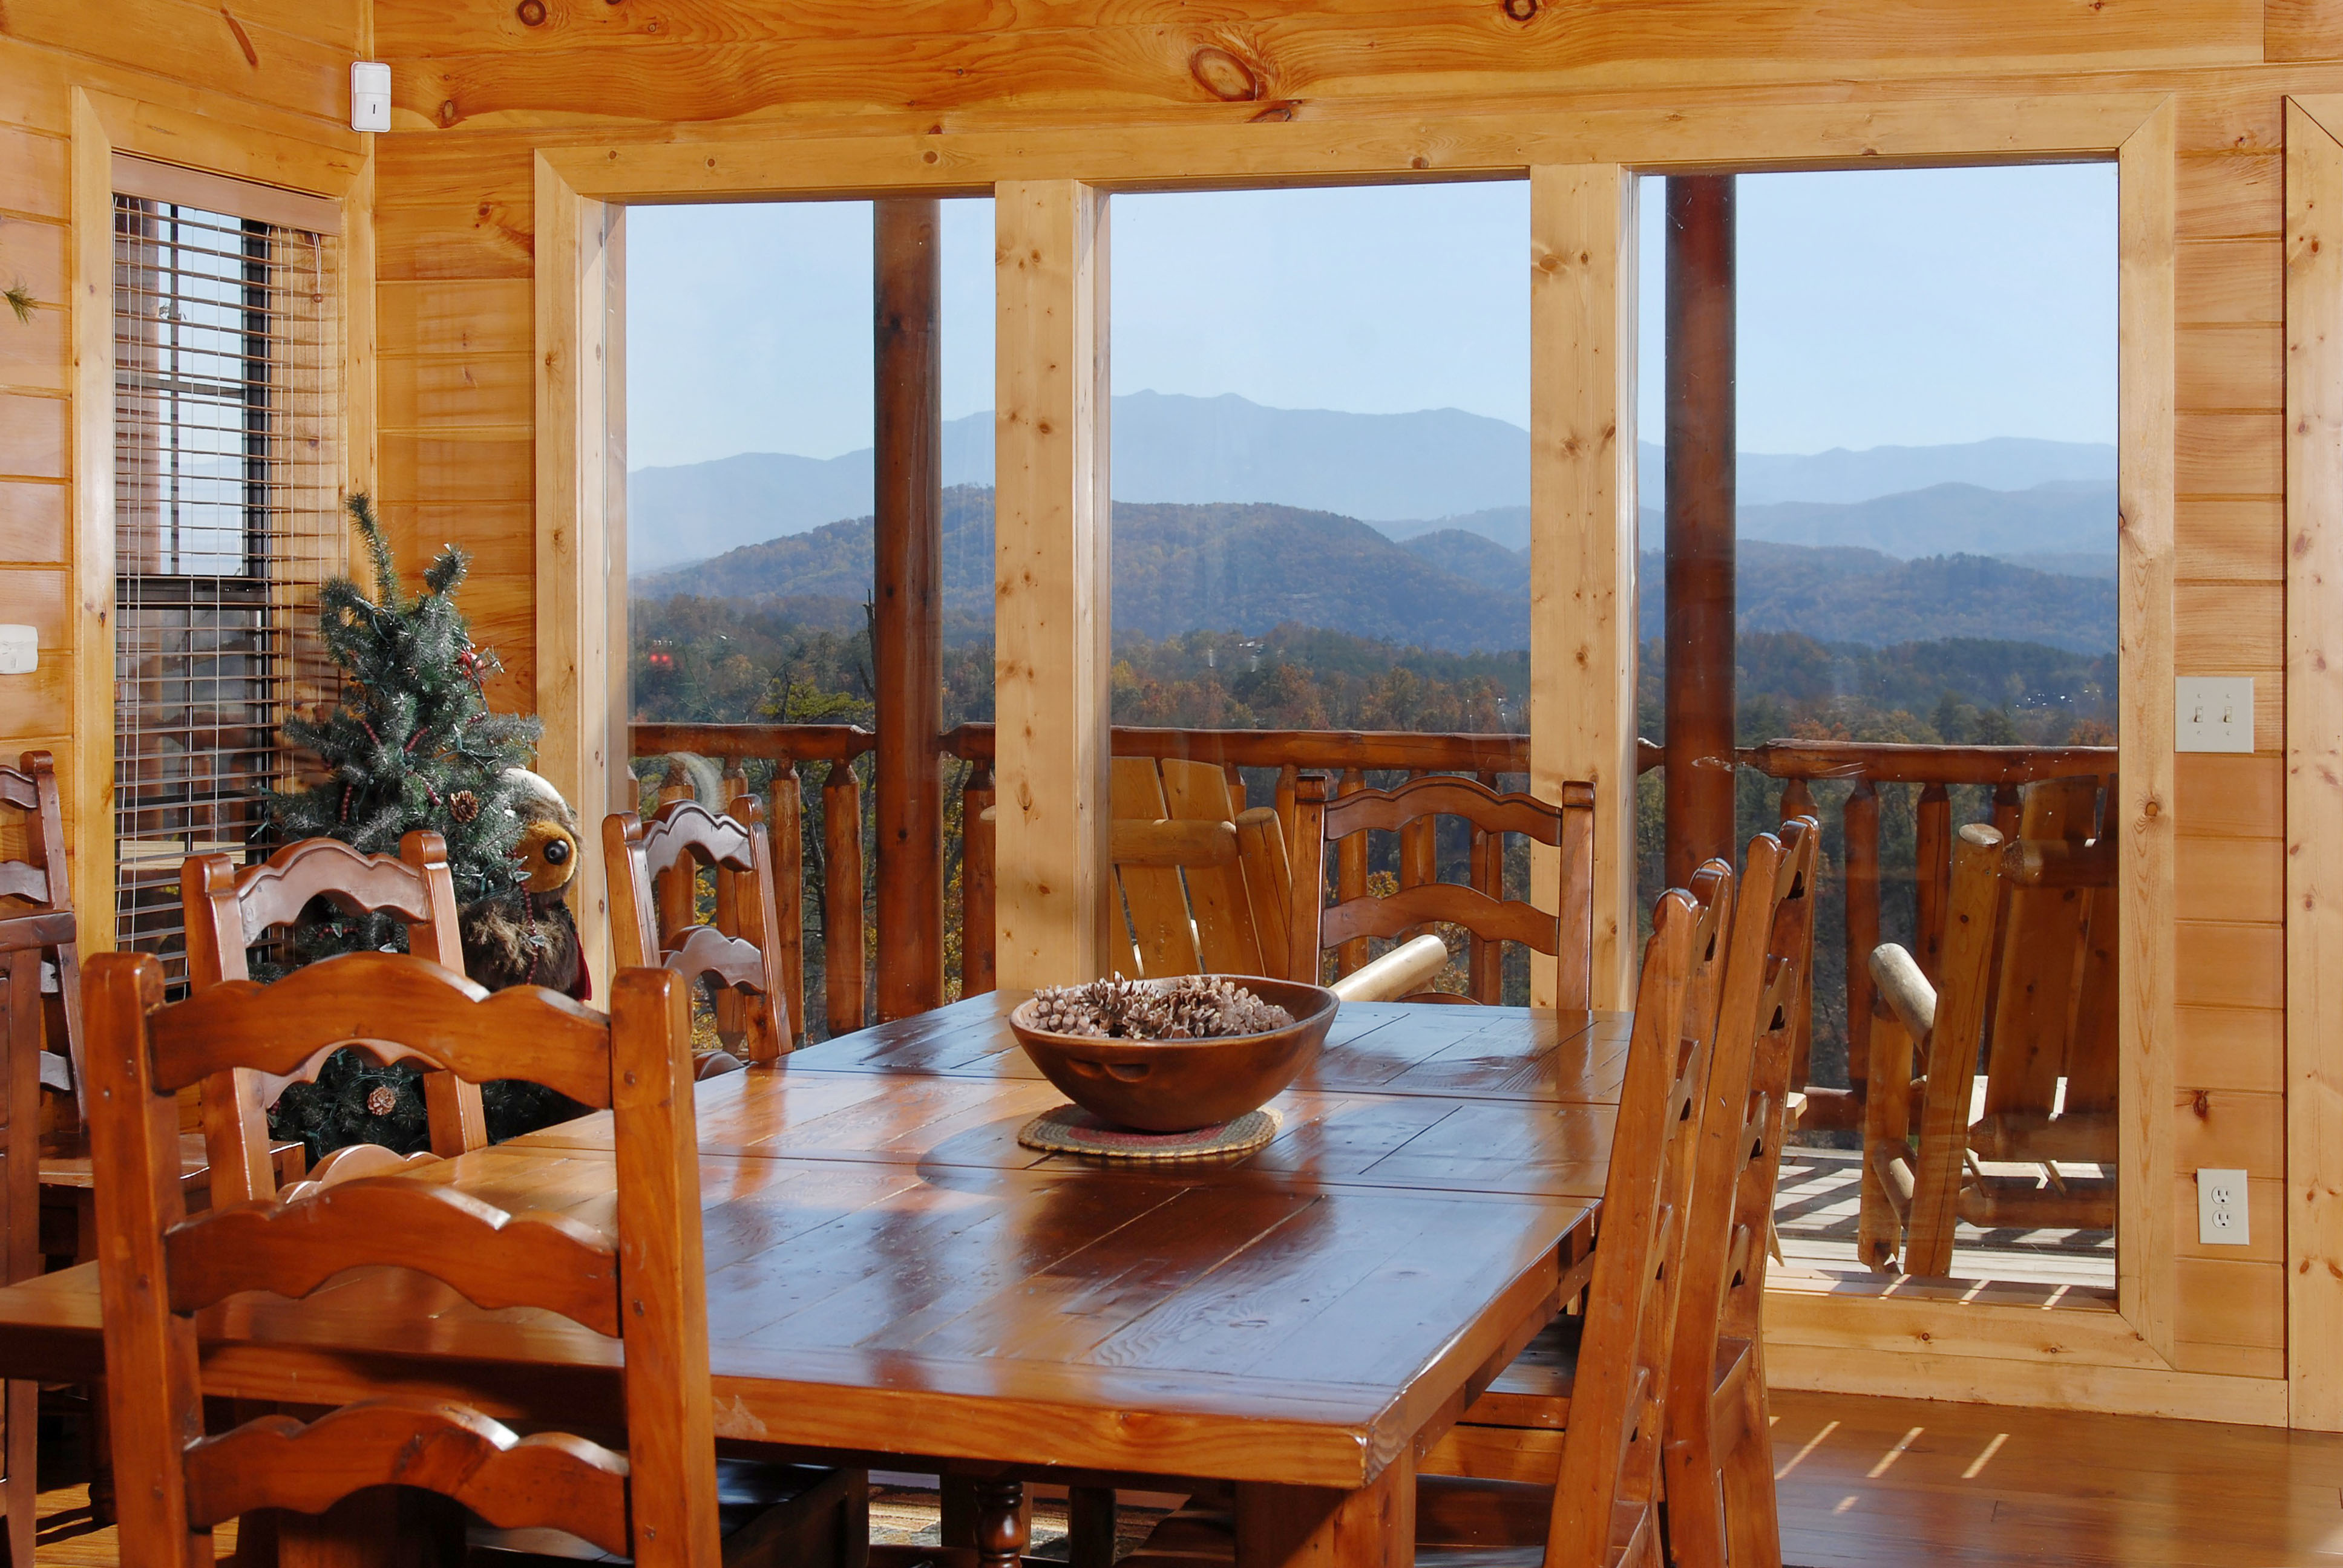 Dinning area with a great mountain view